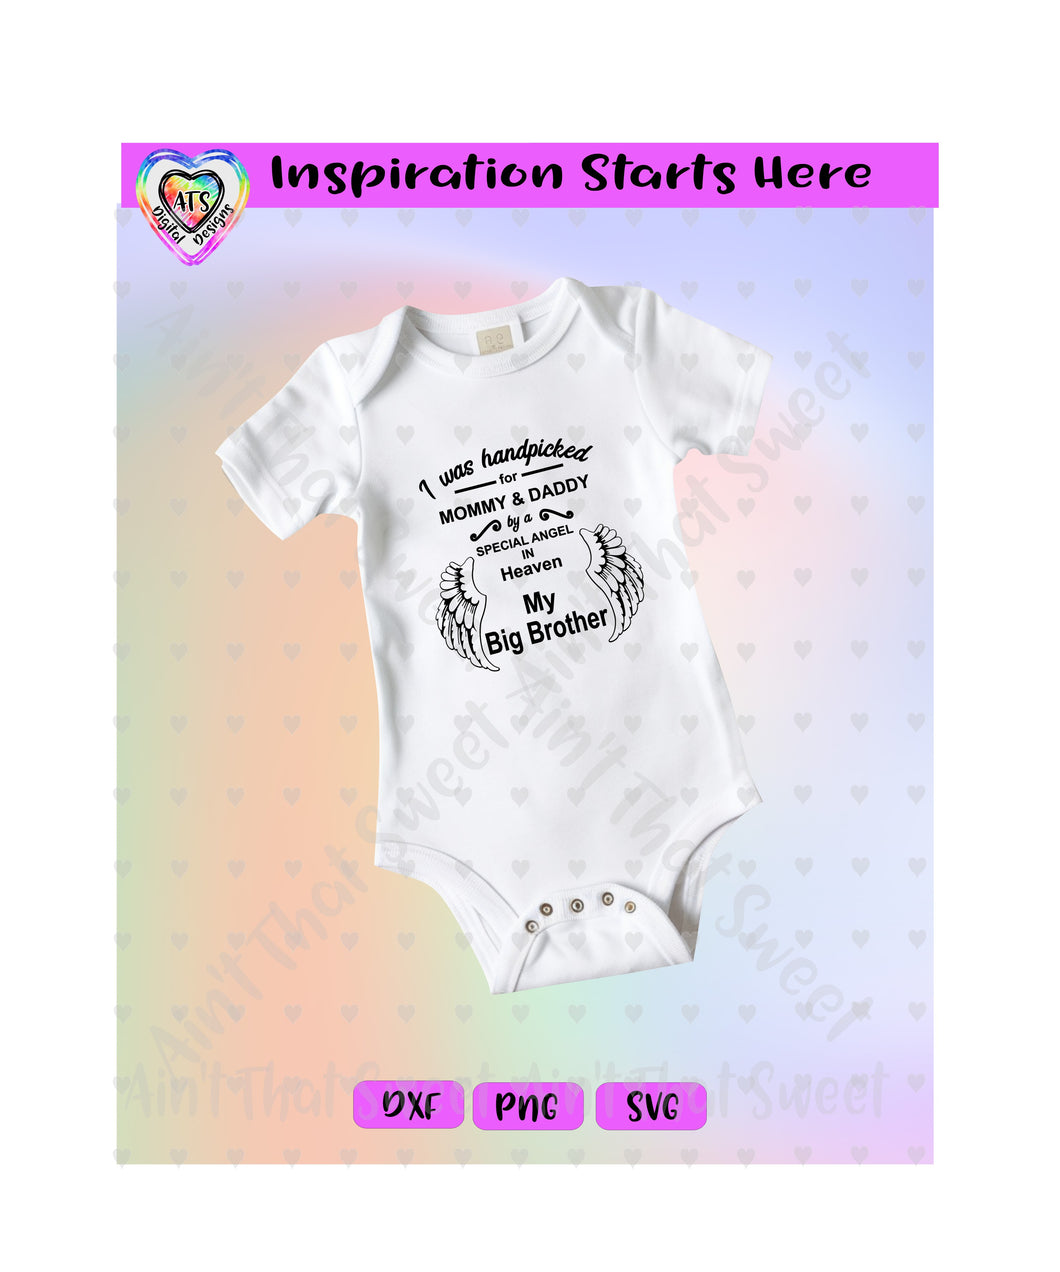 I Was Handpicked For Mommy & Daddy By A Special Angel - My Big Brother | Wings - Transparent PNG, SVG, DXF  - Silhouette, Cricut, Scan N Cut